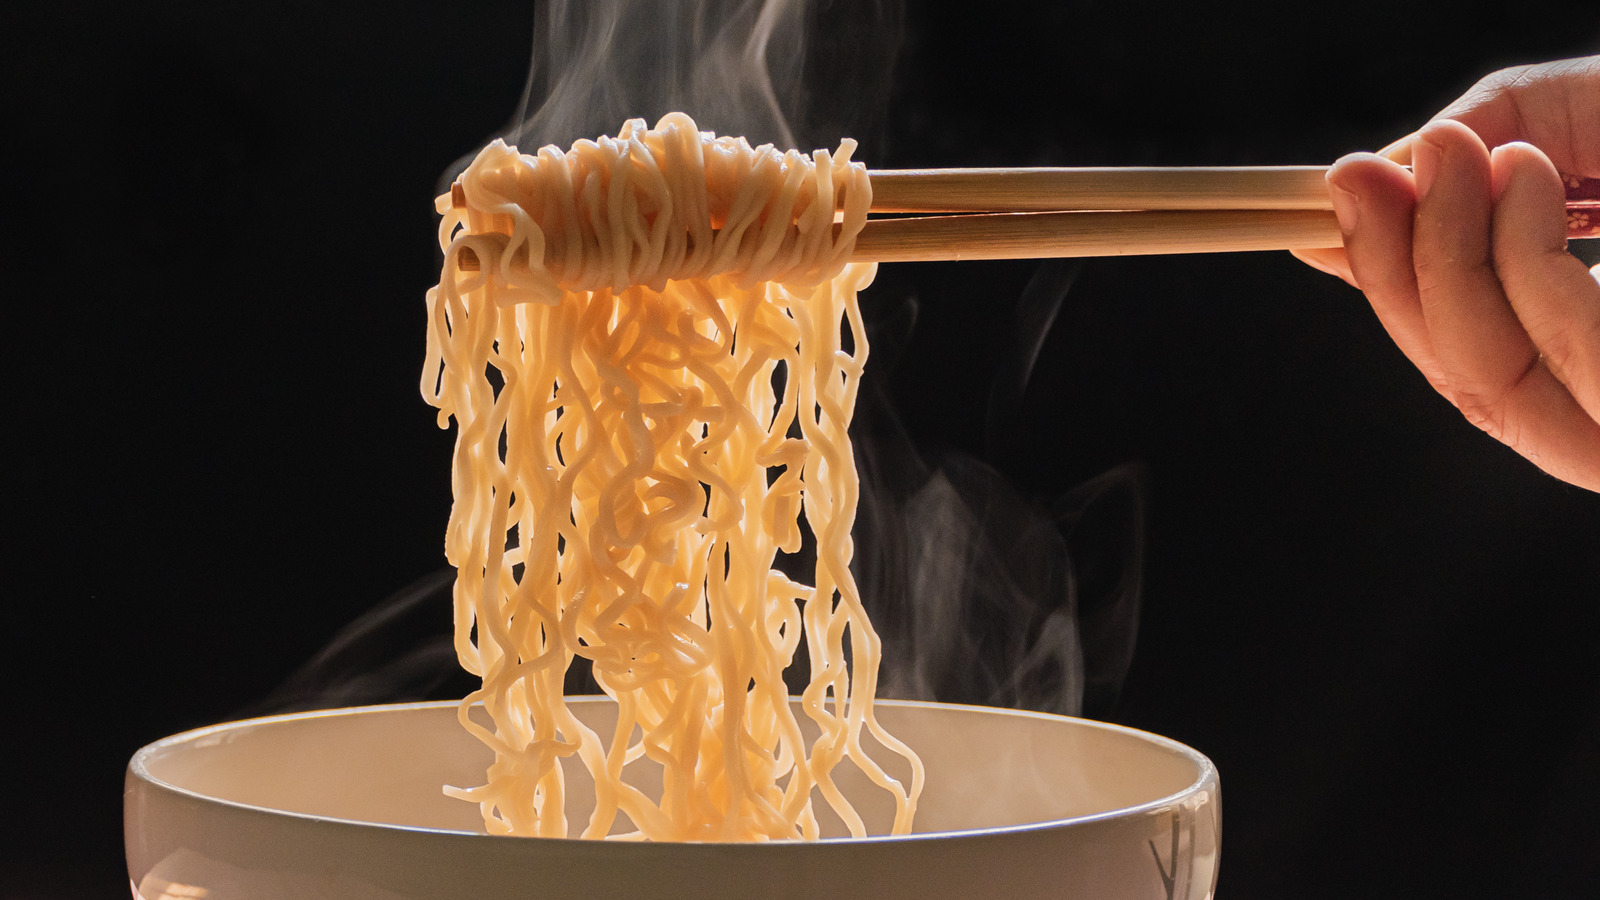 Mistakes People Make When Cooking Ramen